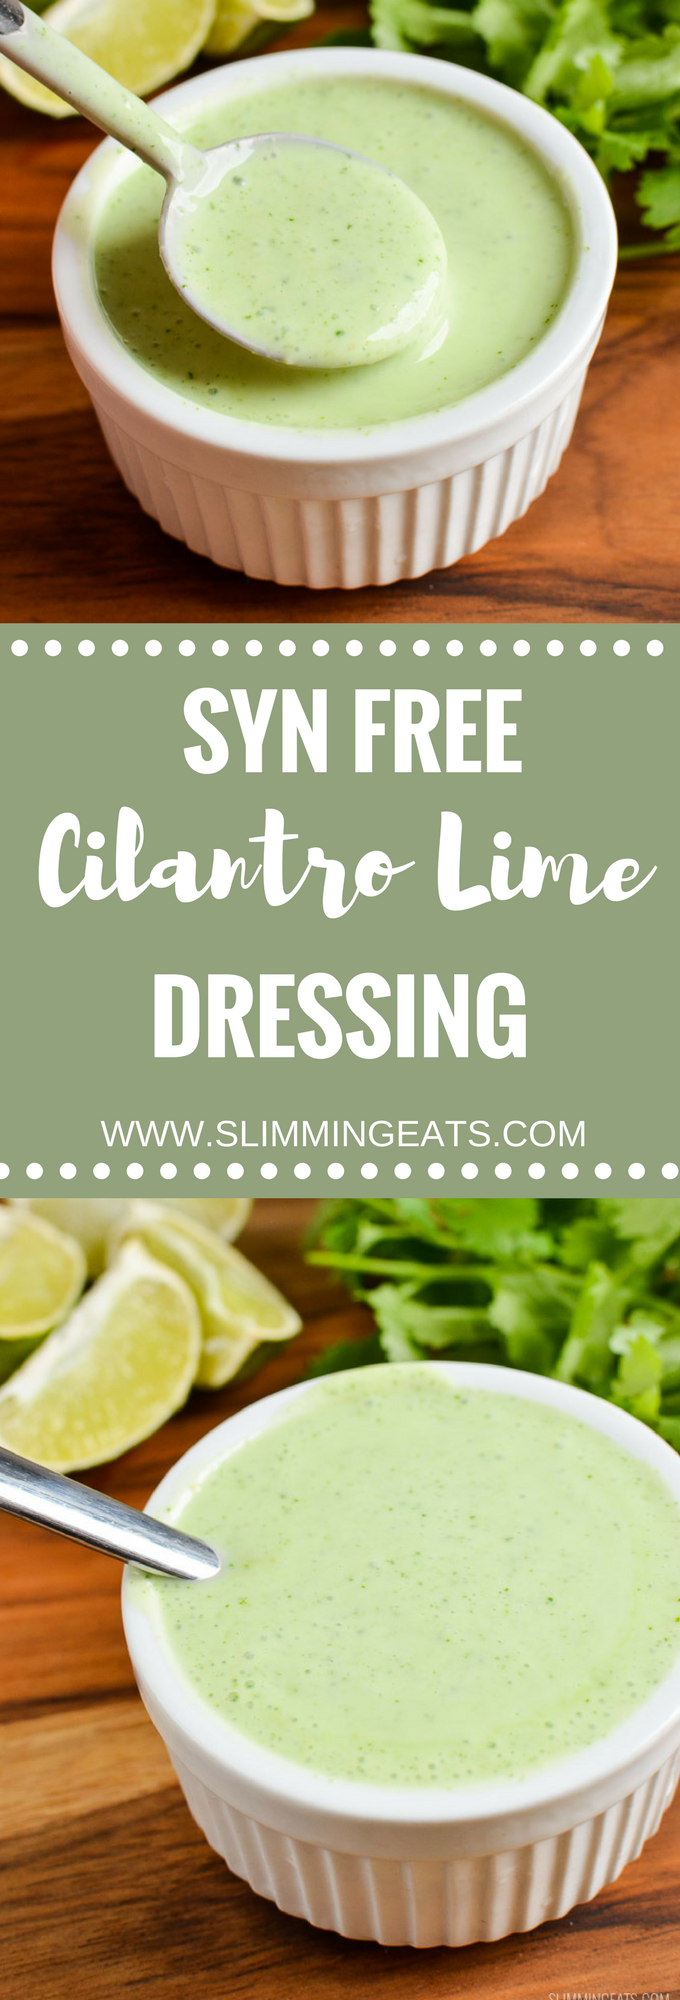 Slimming Eats Syn Free Cilantro Lime Dressing - gluten free, vegetarian, Slimming World and Weight Watchers friendly